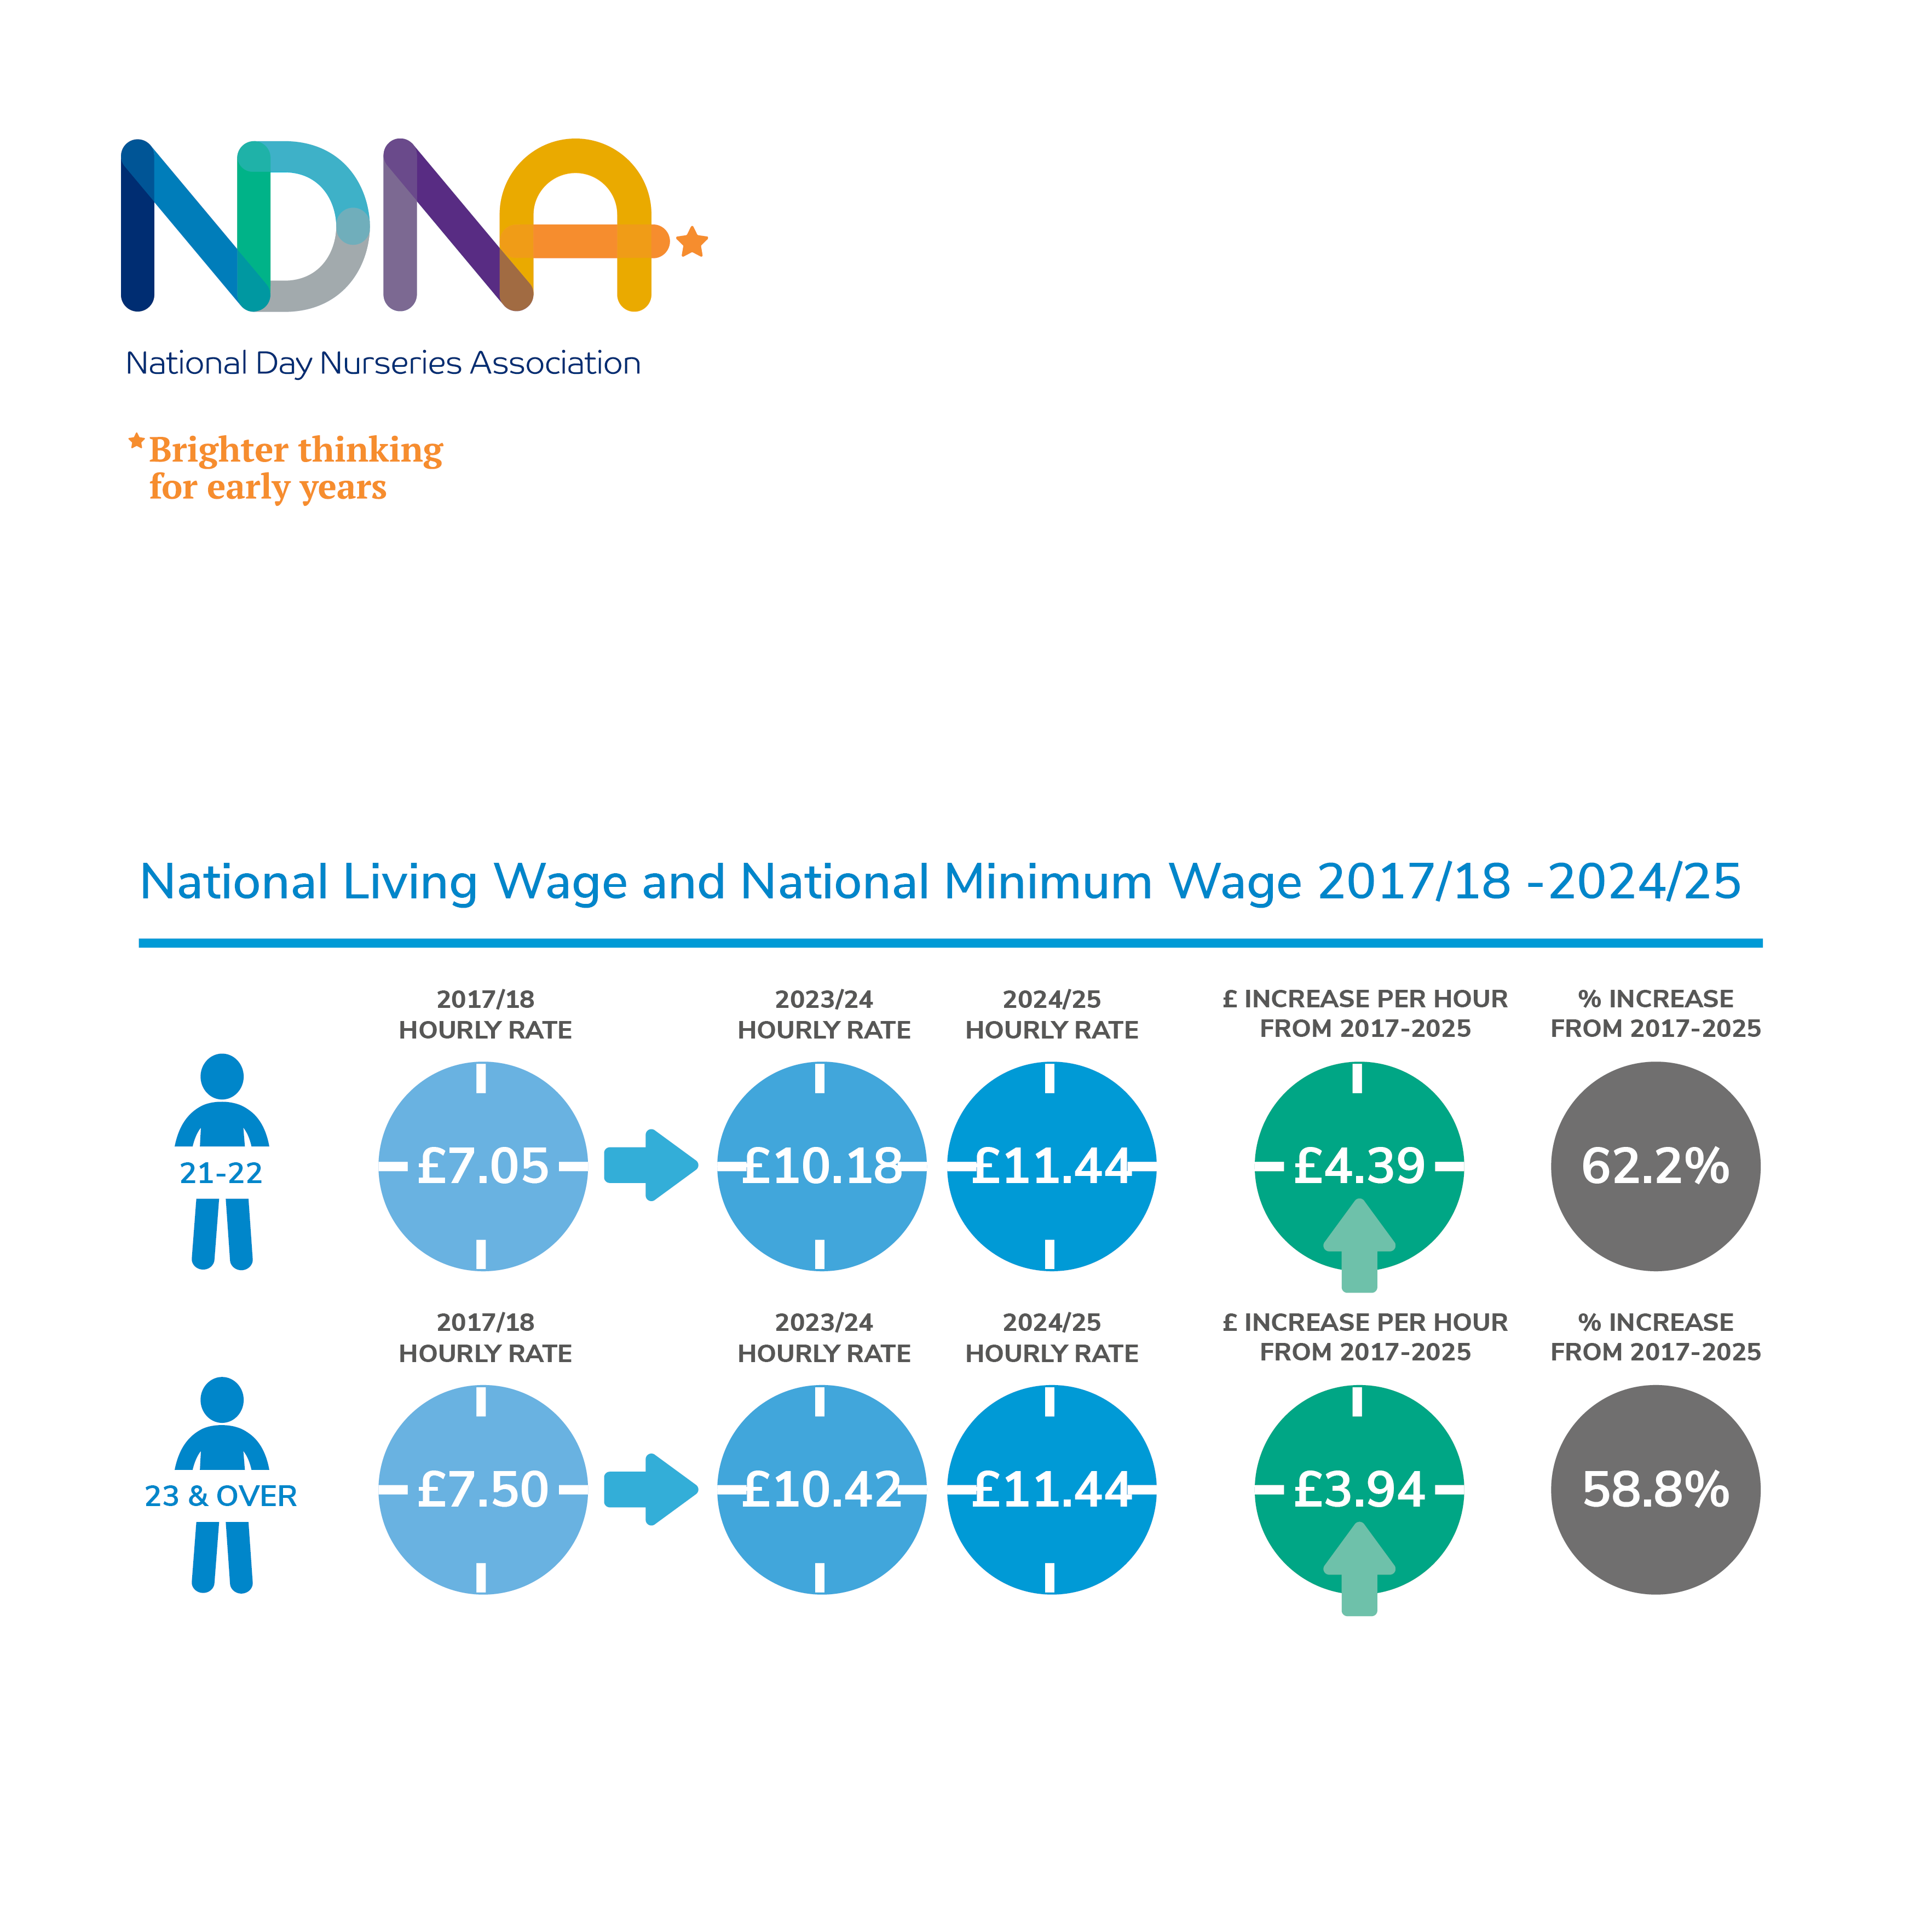 National Minimum Wage and National Living Wage for nurseries